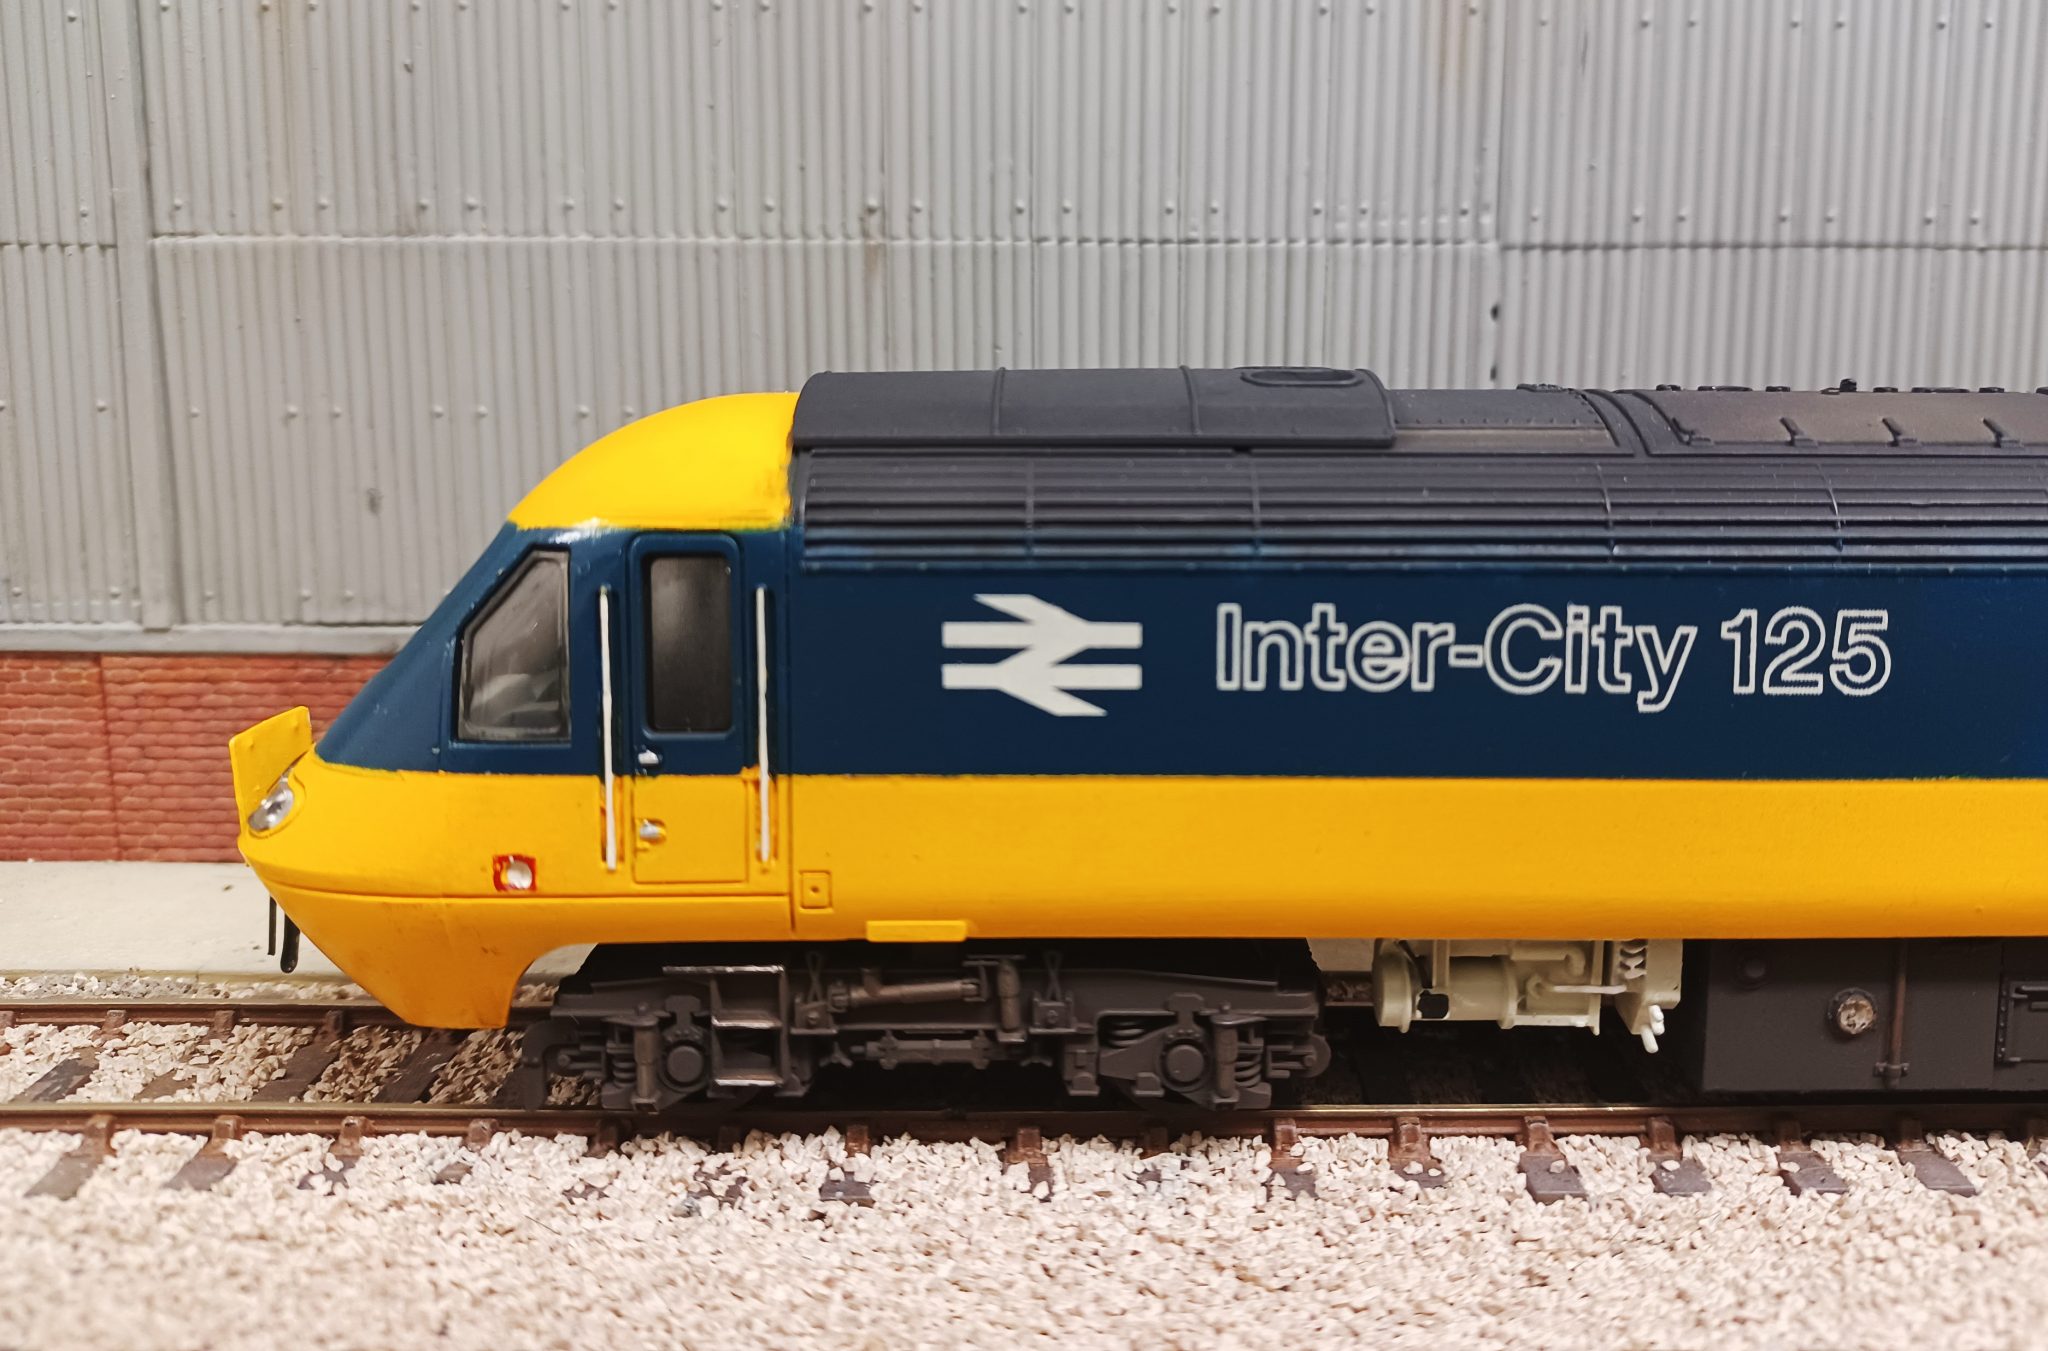 Completed Class 43 HST power car.